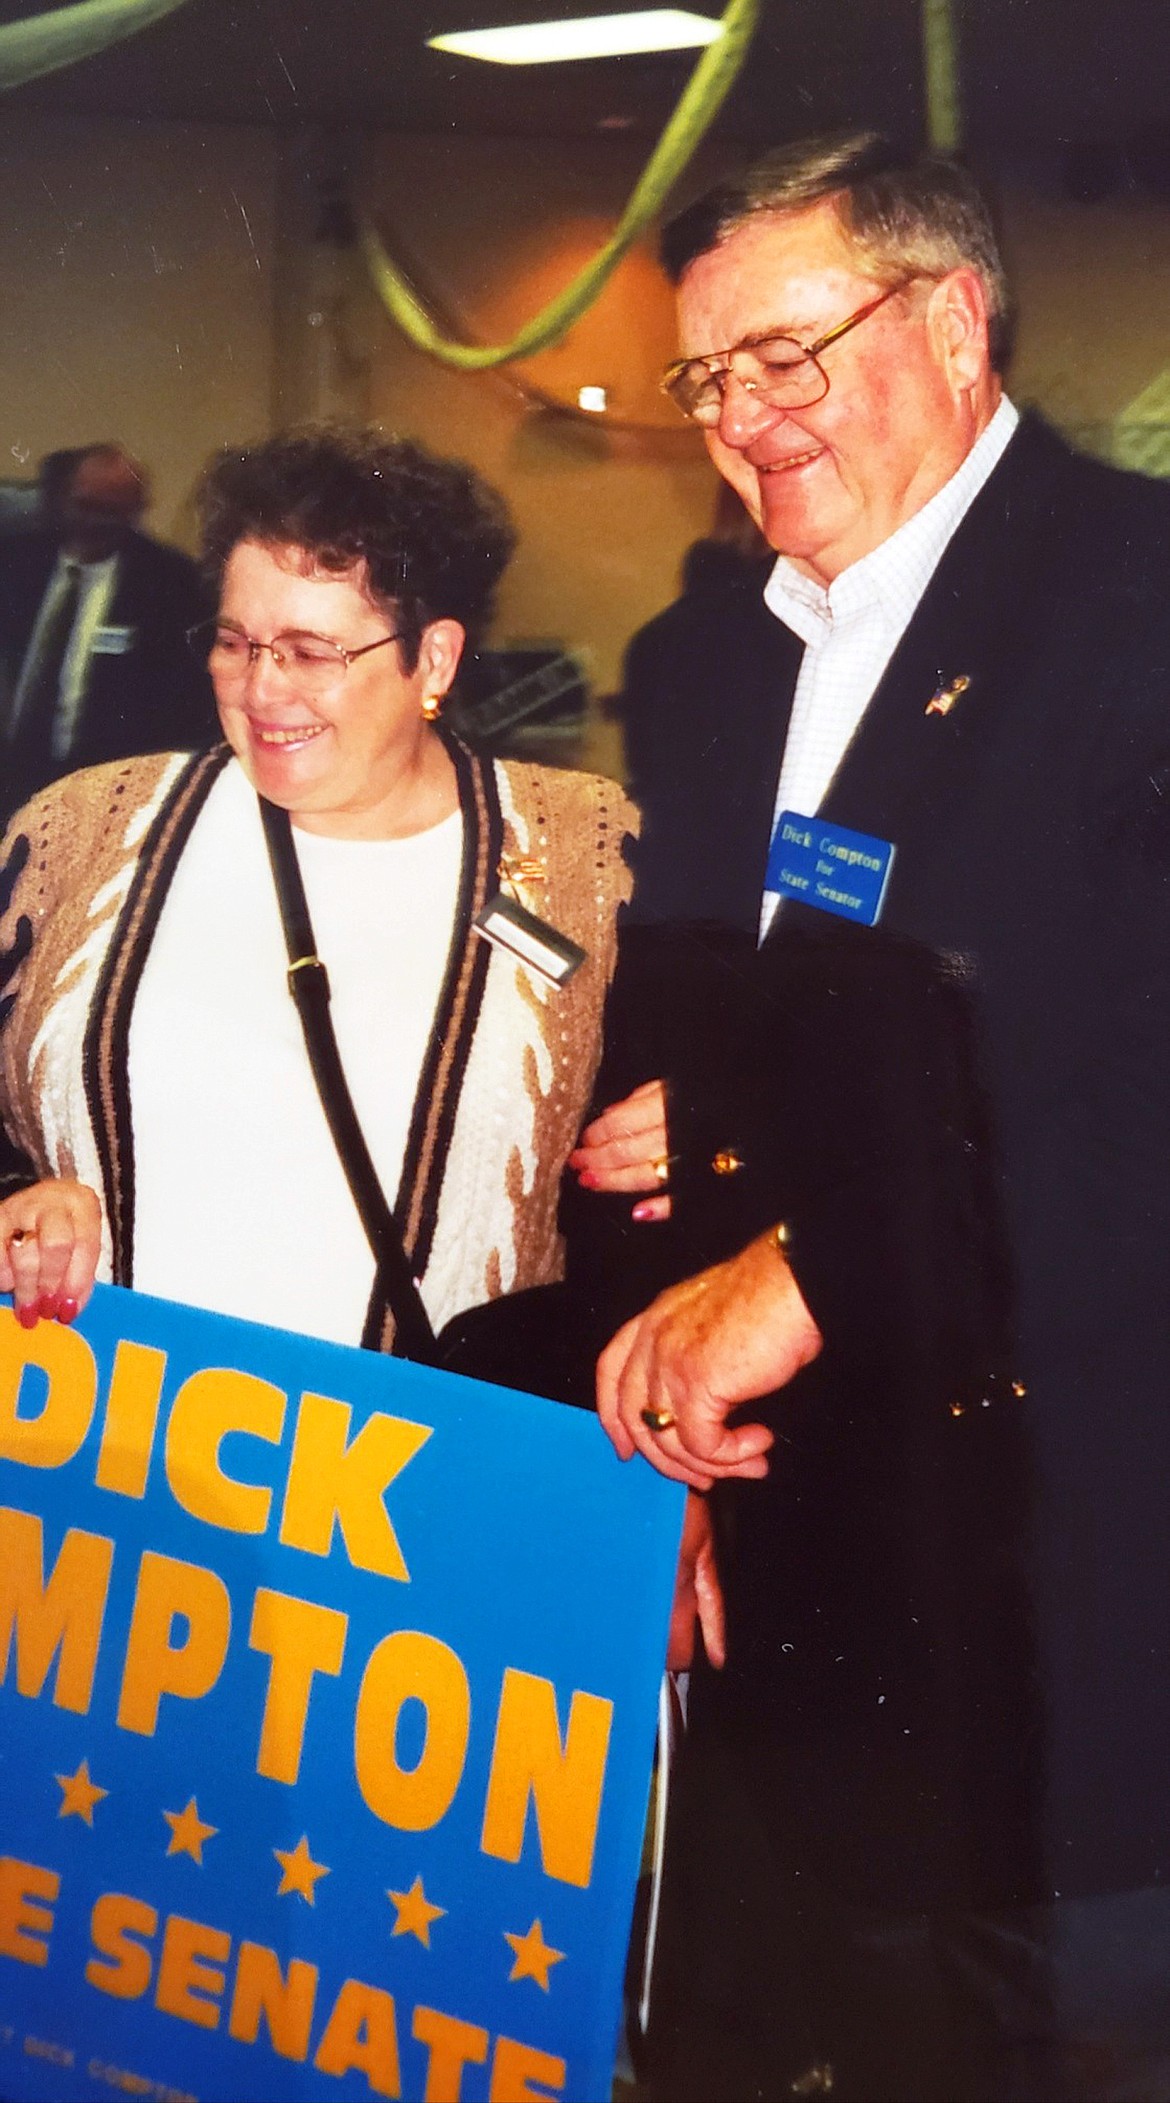 Dick Compton with wife Janette during his campaign for the Idaho Senate.